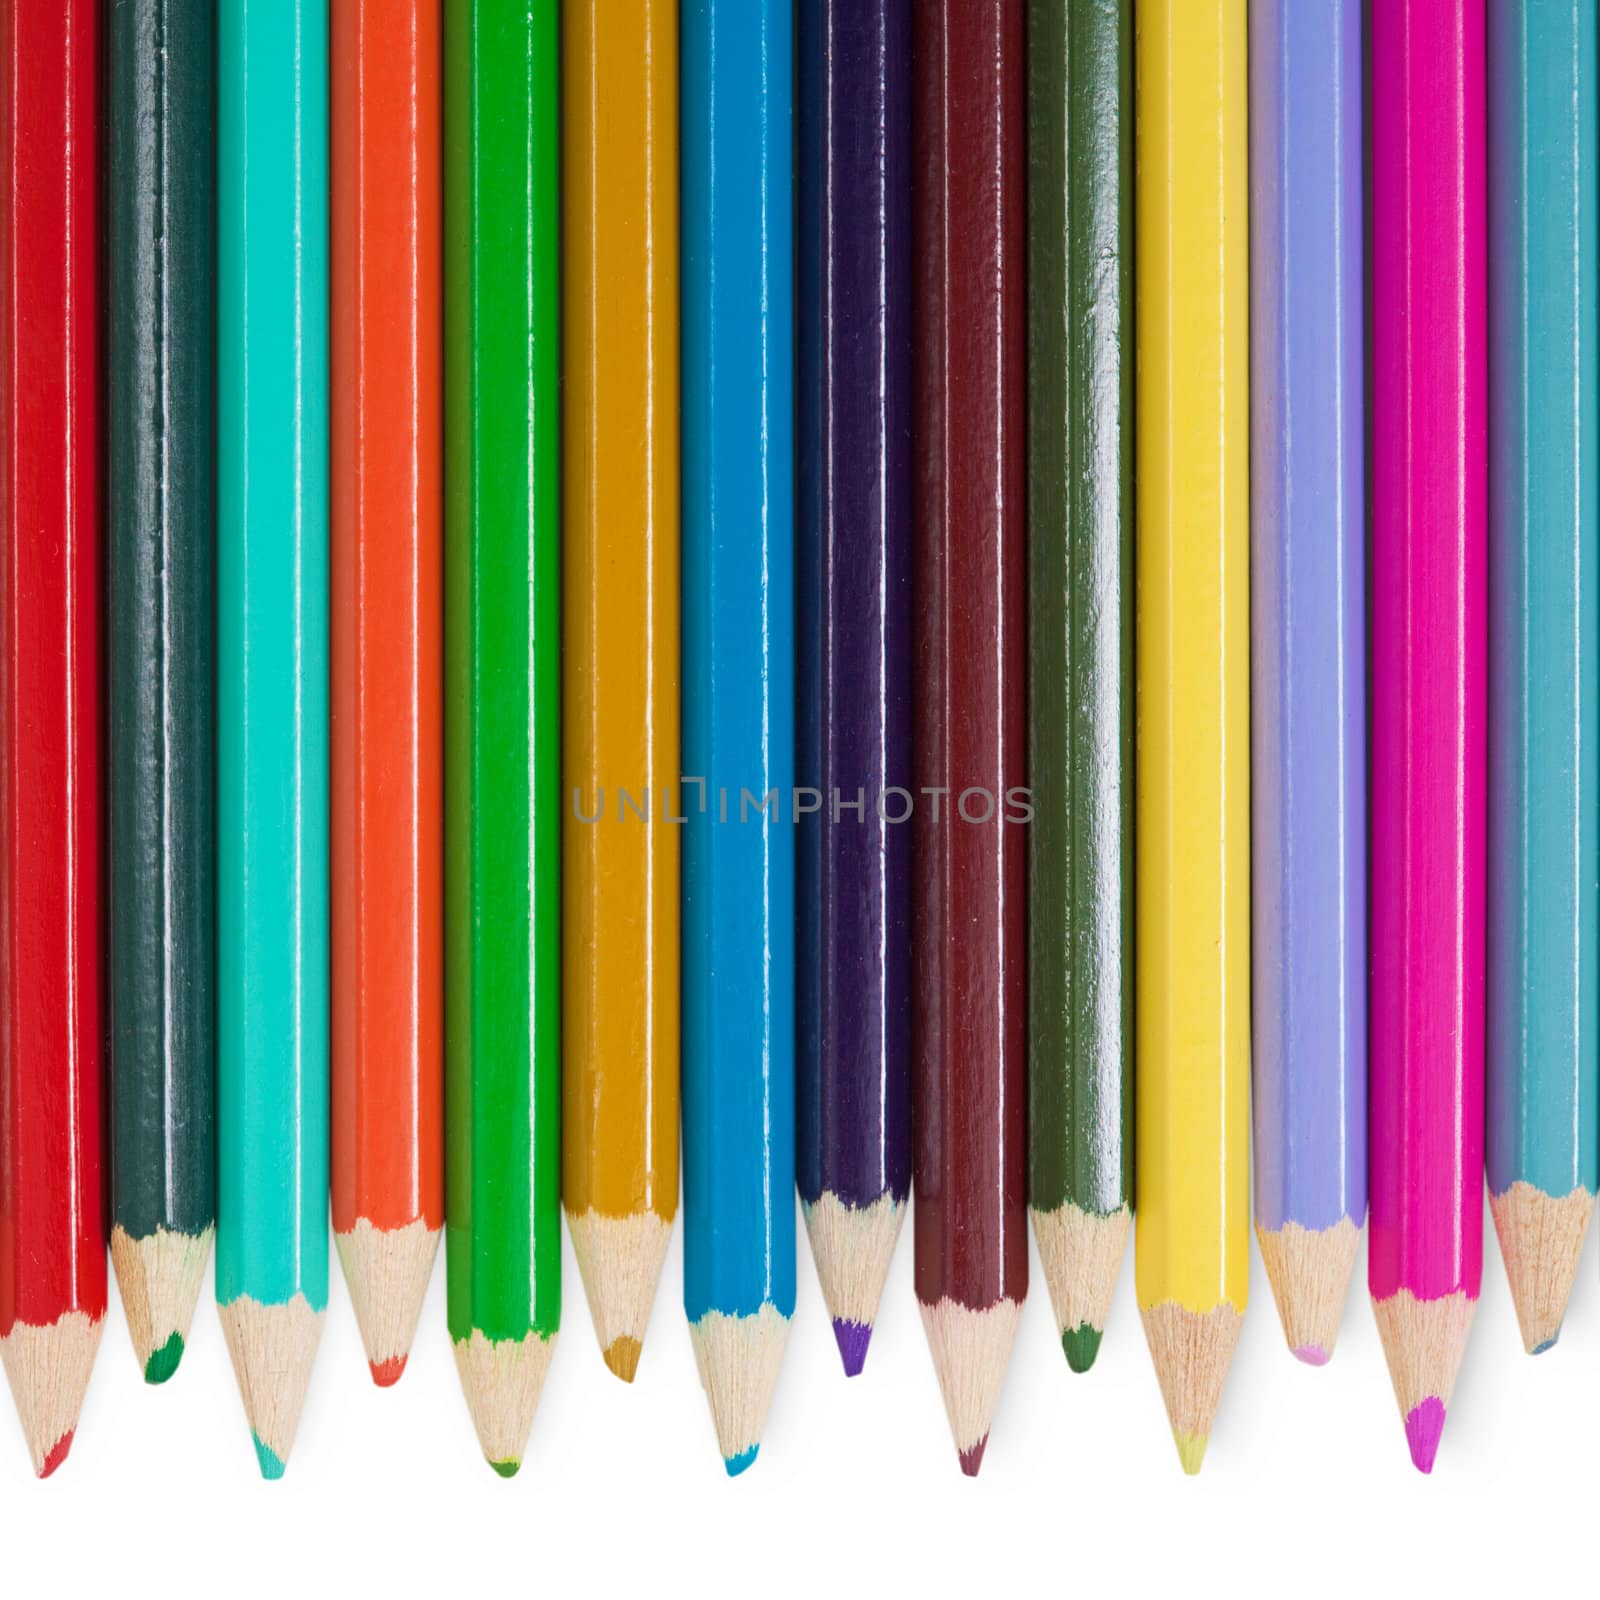 Fourteen color pencils on white background by pzaxe